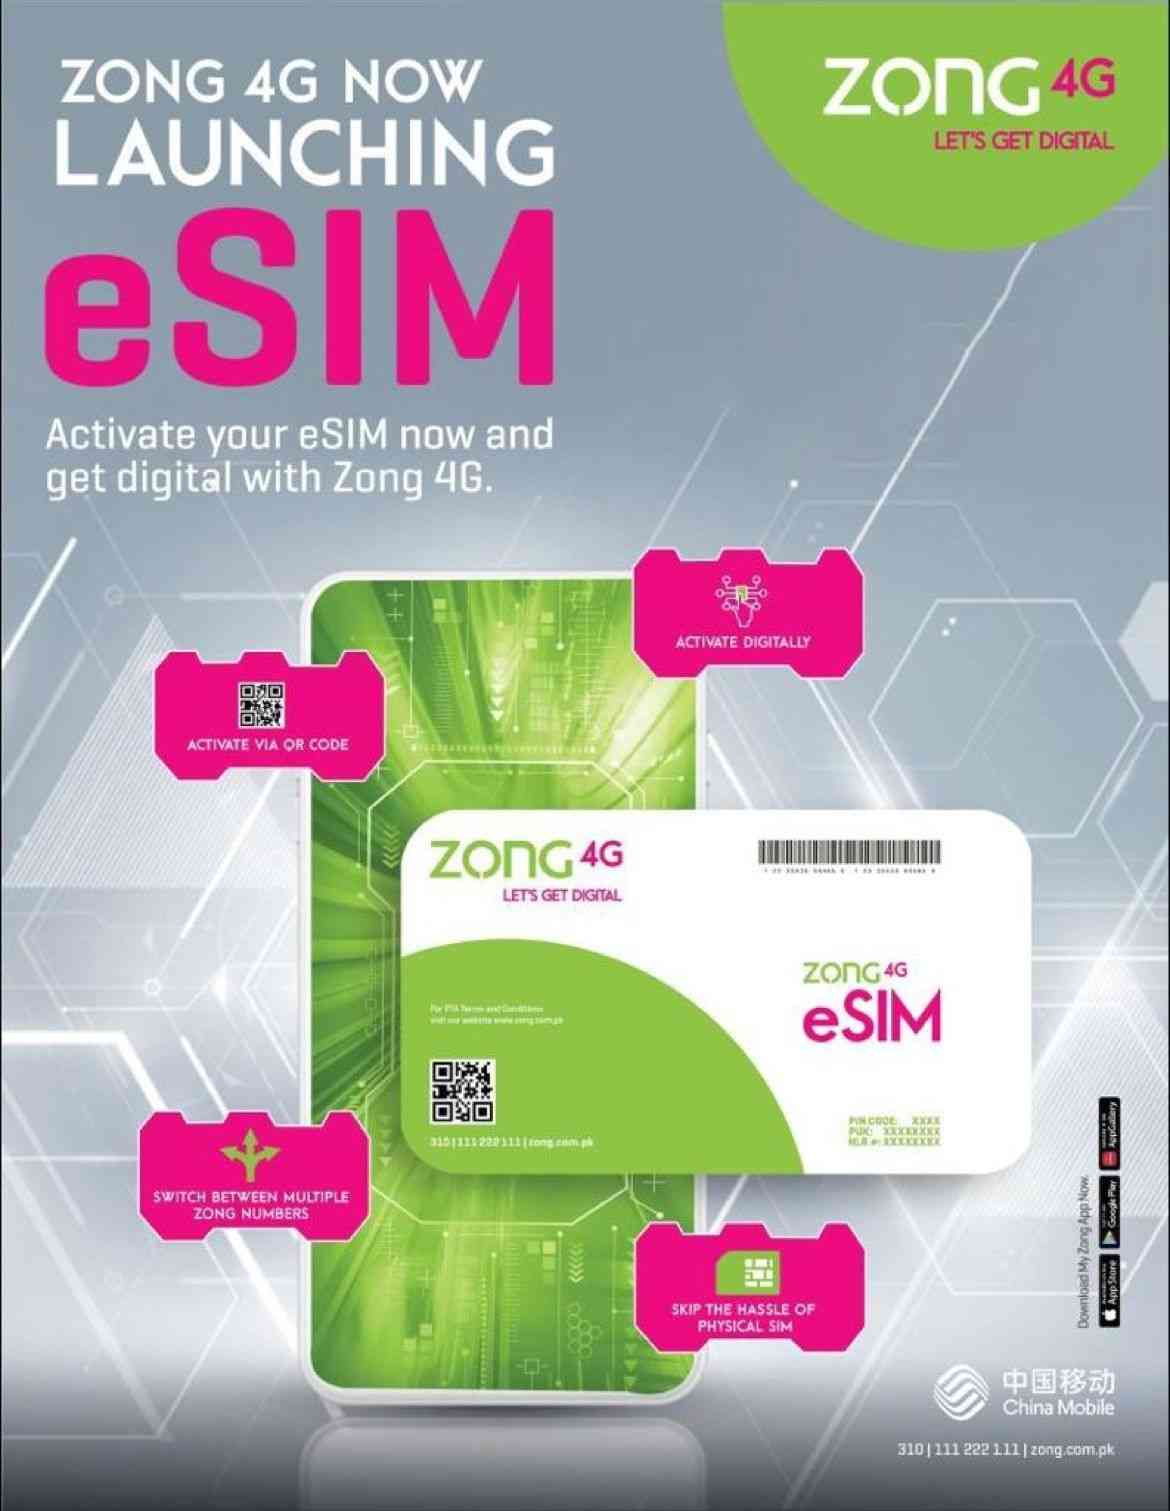 Zong eSim Launched - Here is How you can Upgrade!